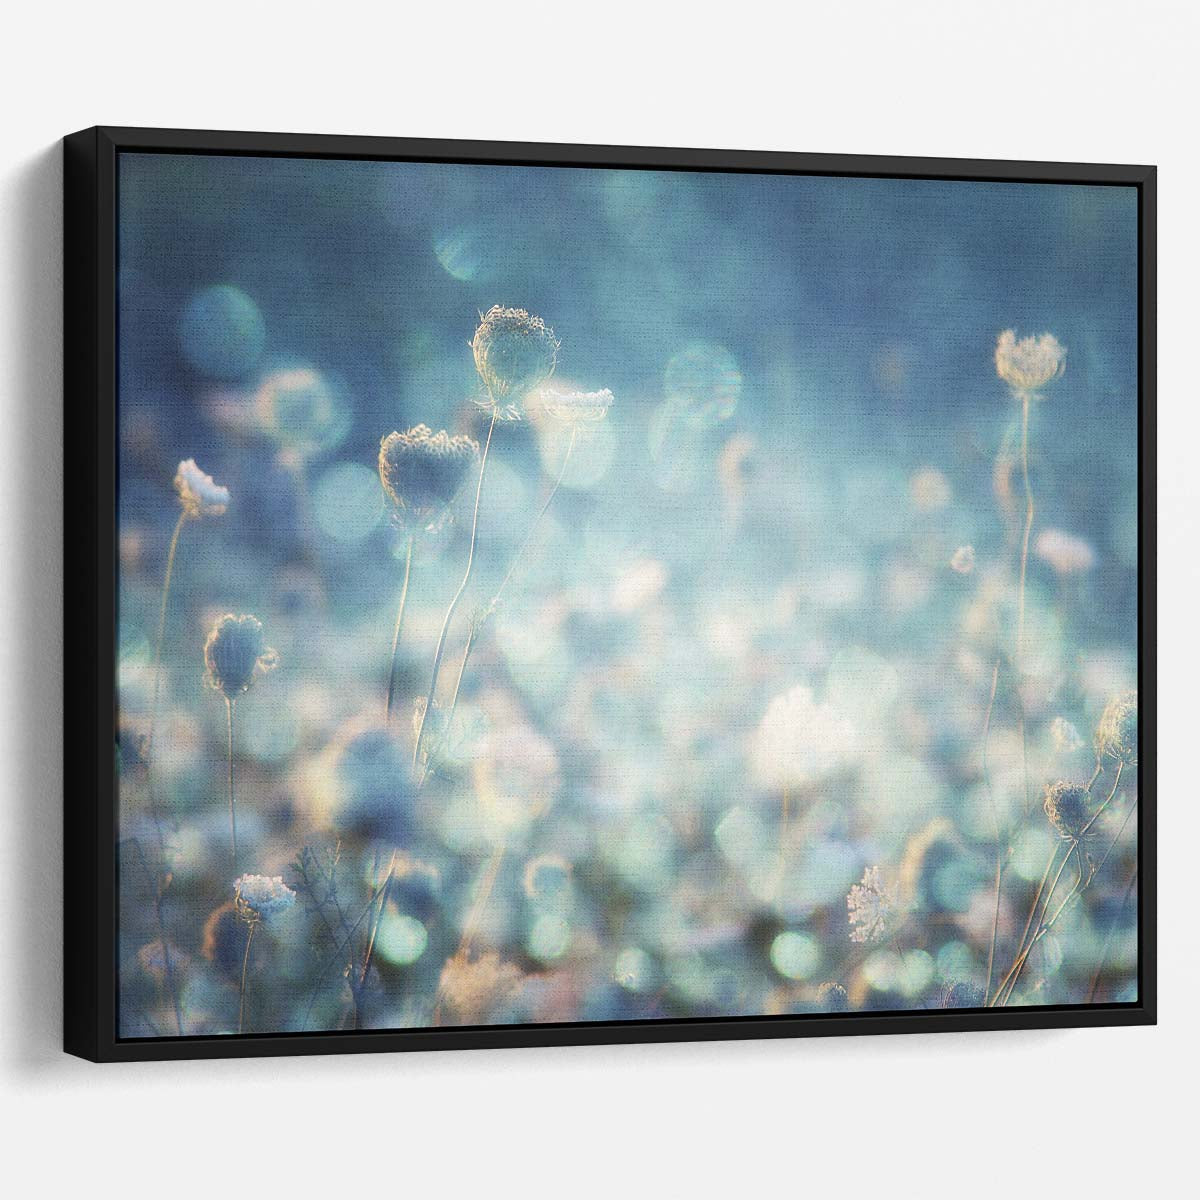 Turquoise Pastel Macro Dandelion Flora Wall Art by Luxuriance Designs. Made in USA.